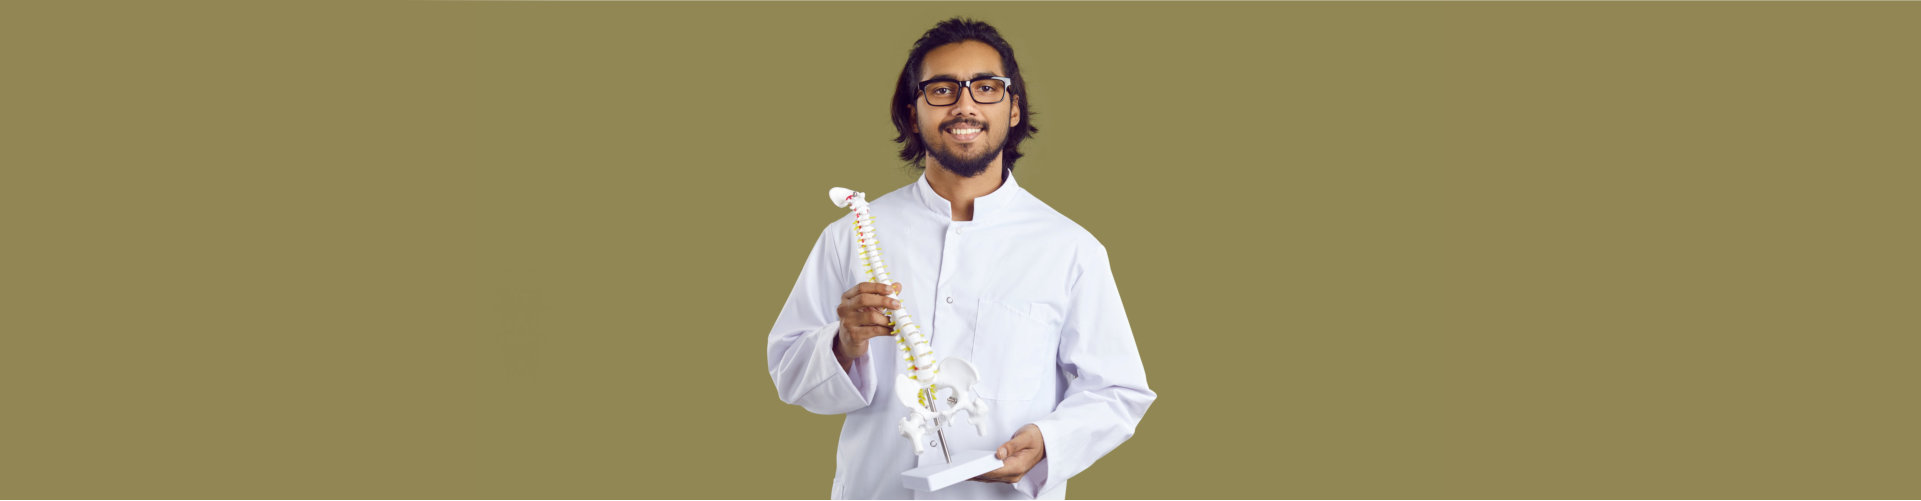 smiling doctor carrying a spine model